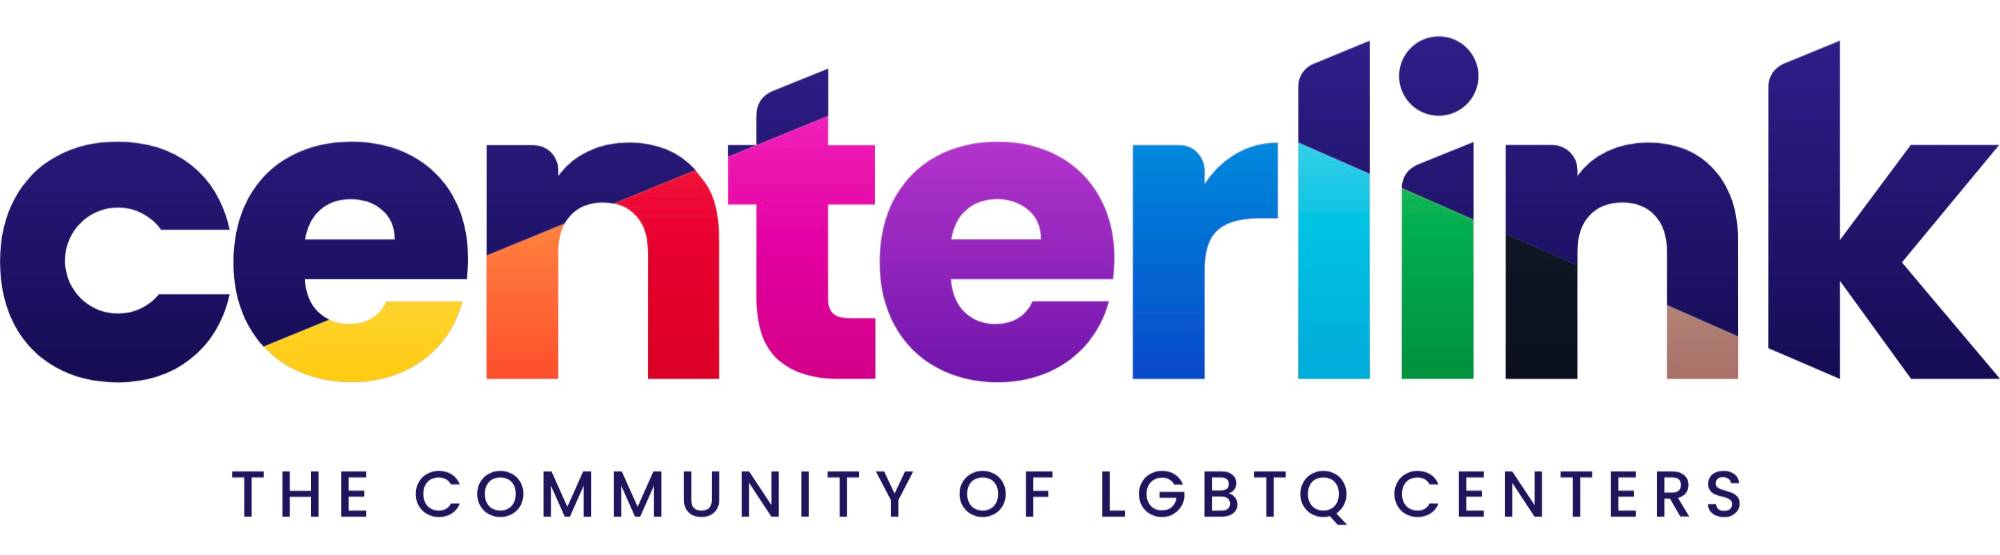 Consortium of Higher Education Member and The Community of LGBT Centers